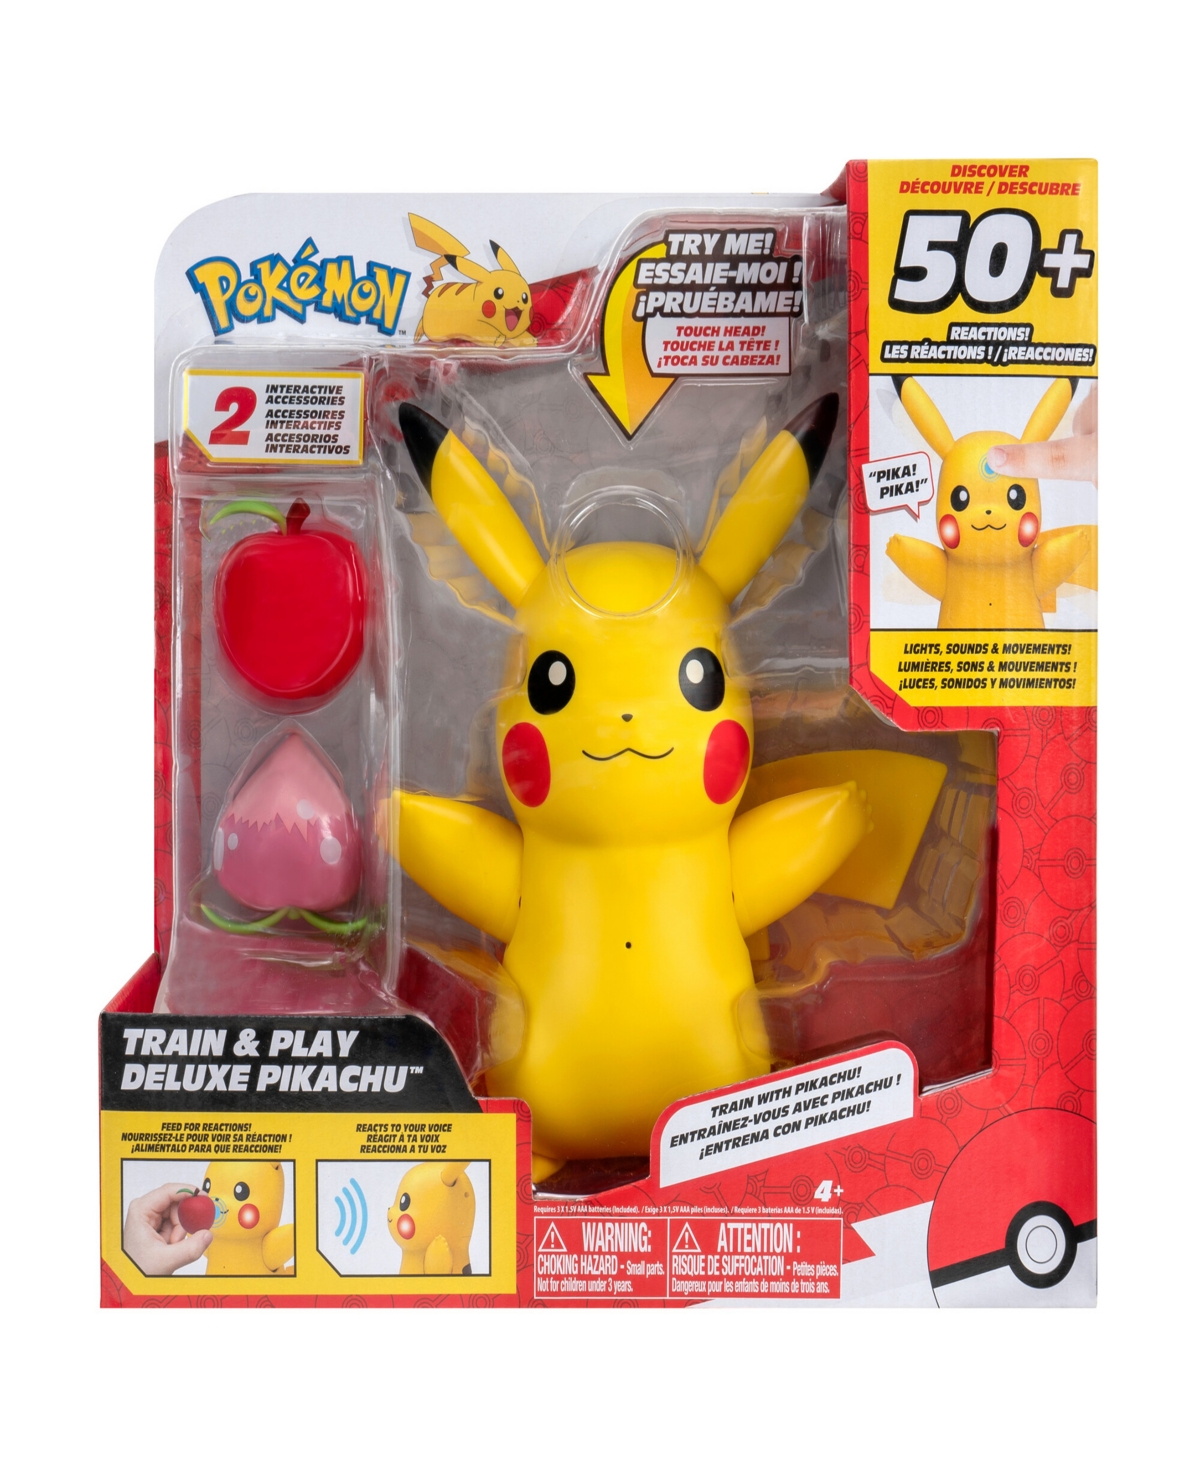 Pokémon Pikachu Train And Play Deluxe Interactive Action Figure In Multi Color